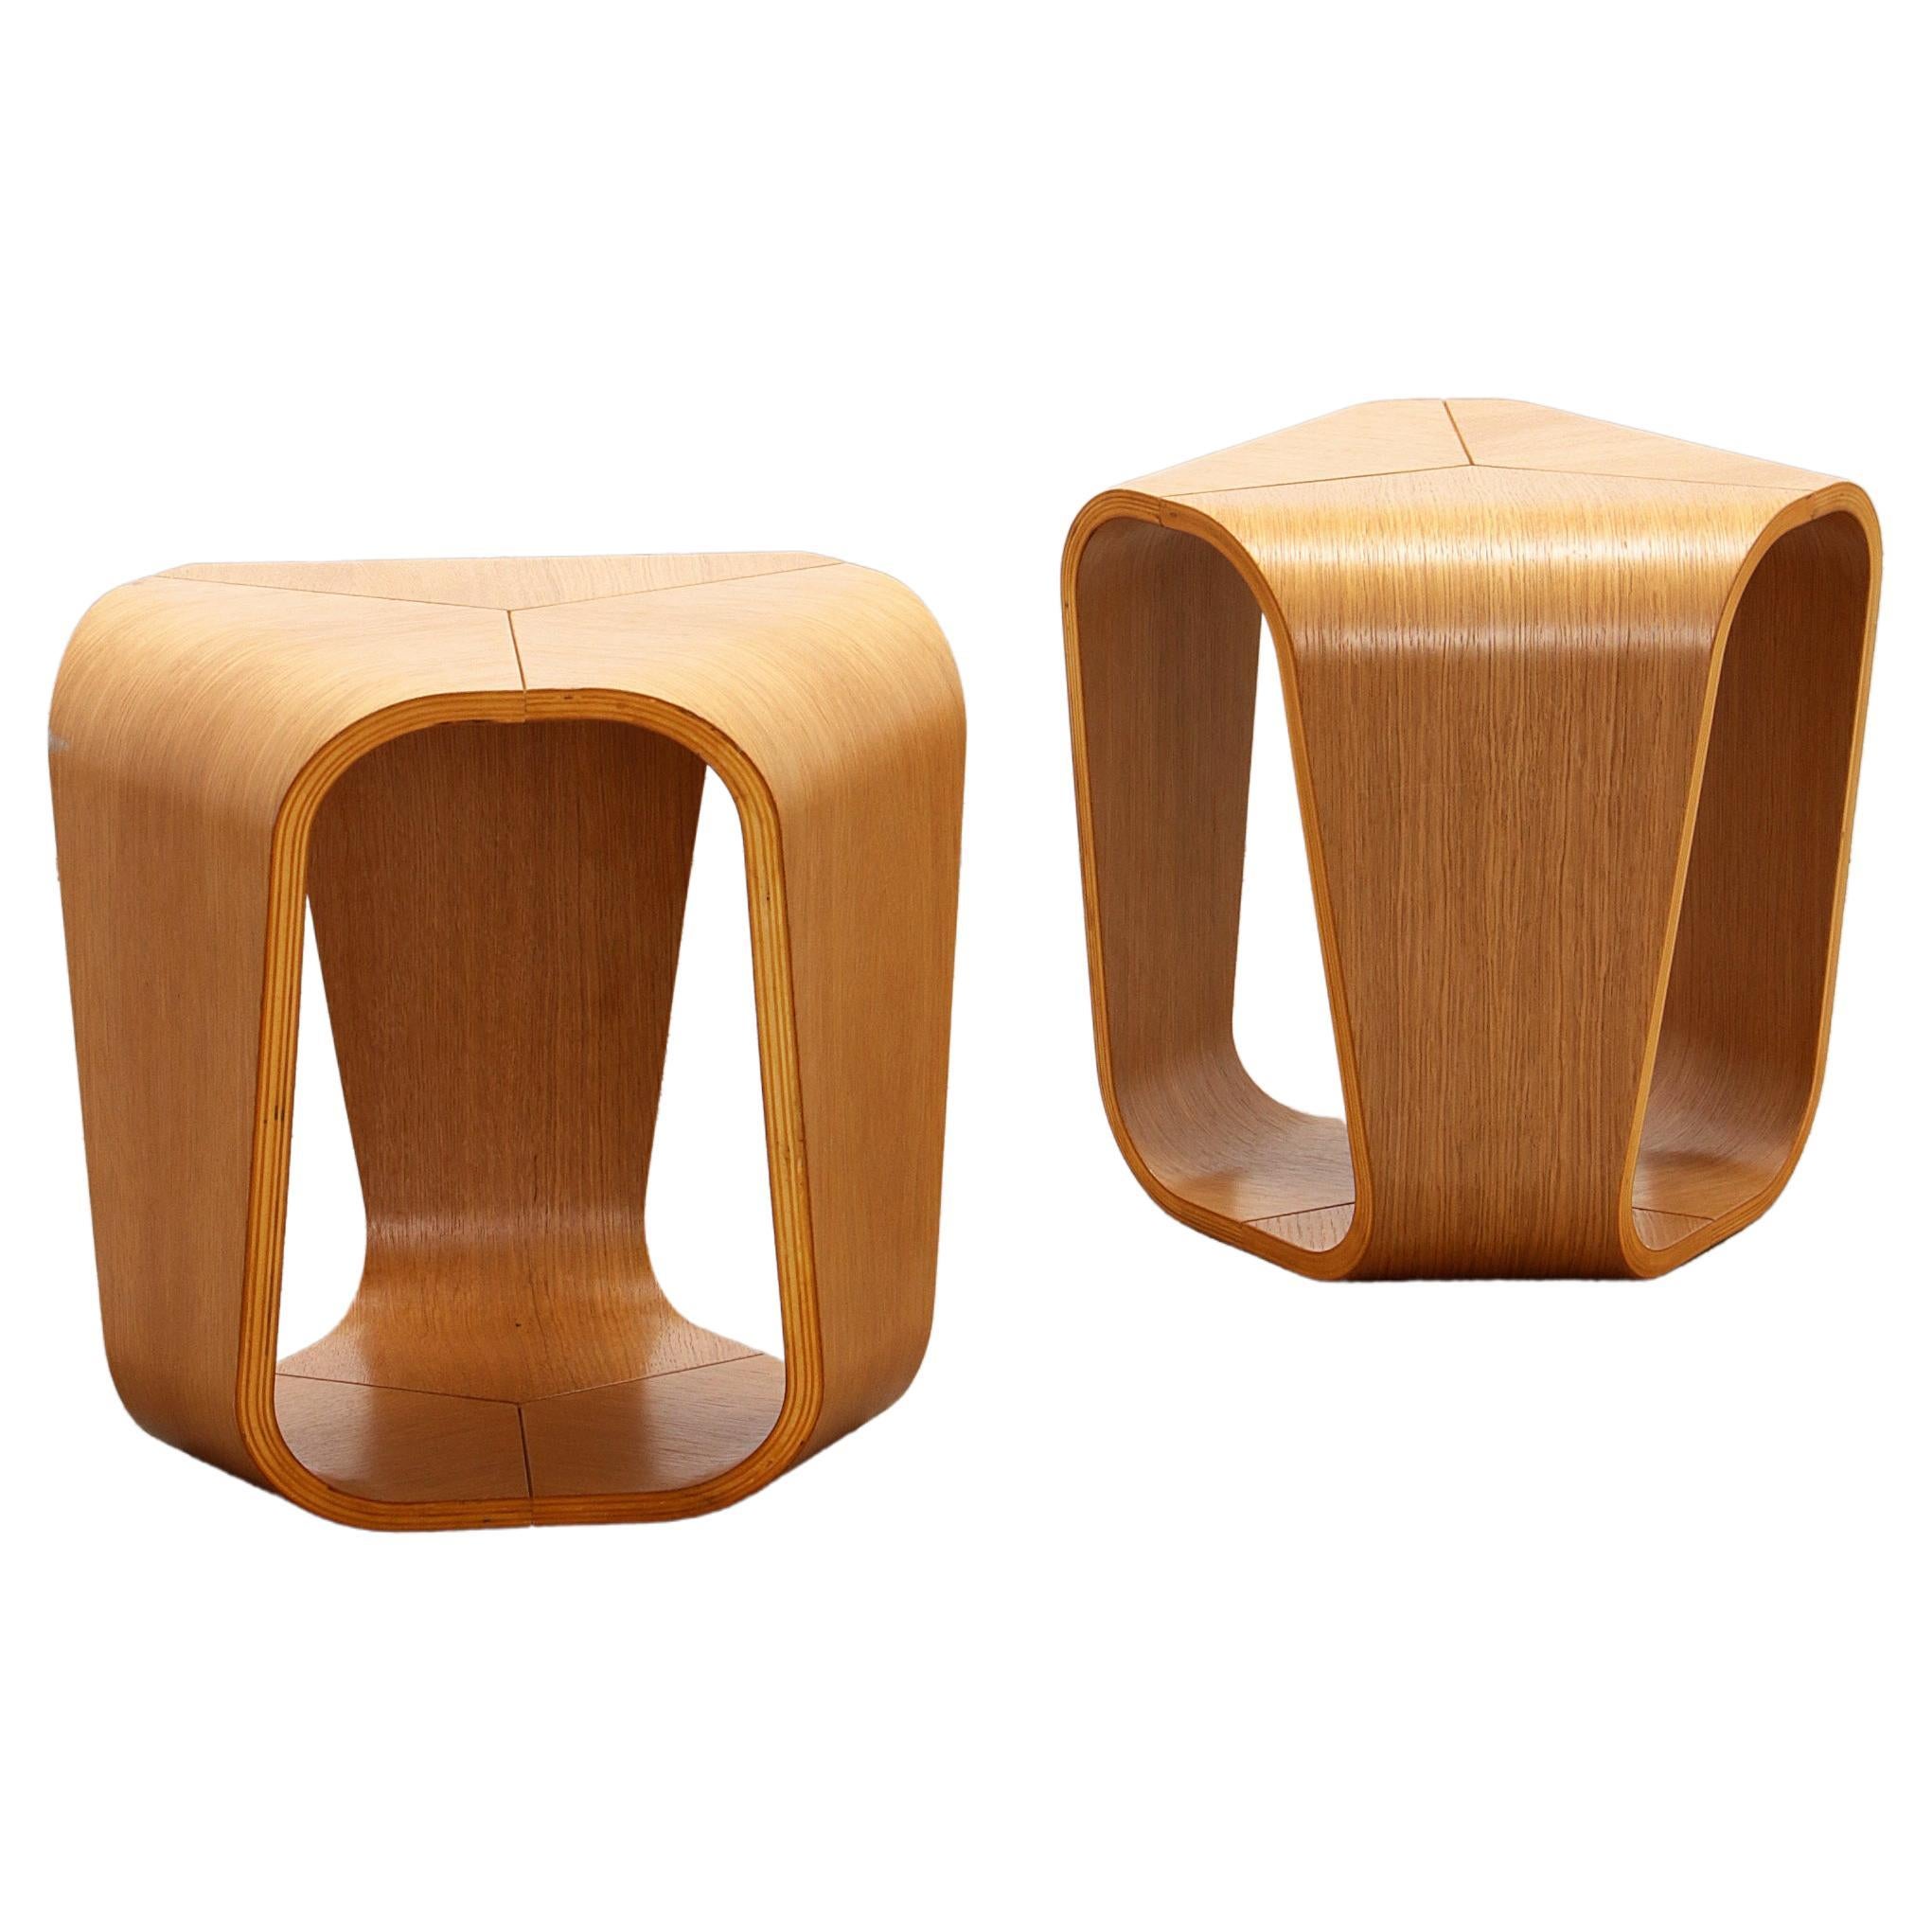 Set of side tables by Enrico Cesana by Busnelli, 1990 Italy.